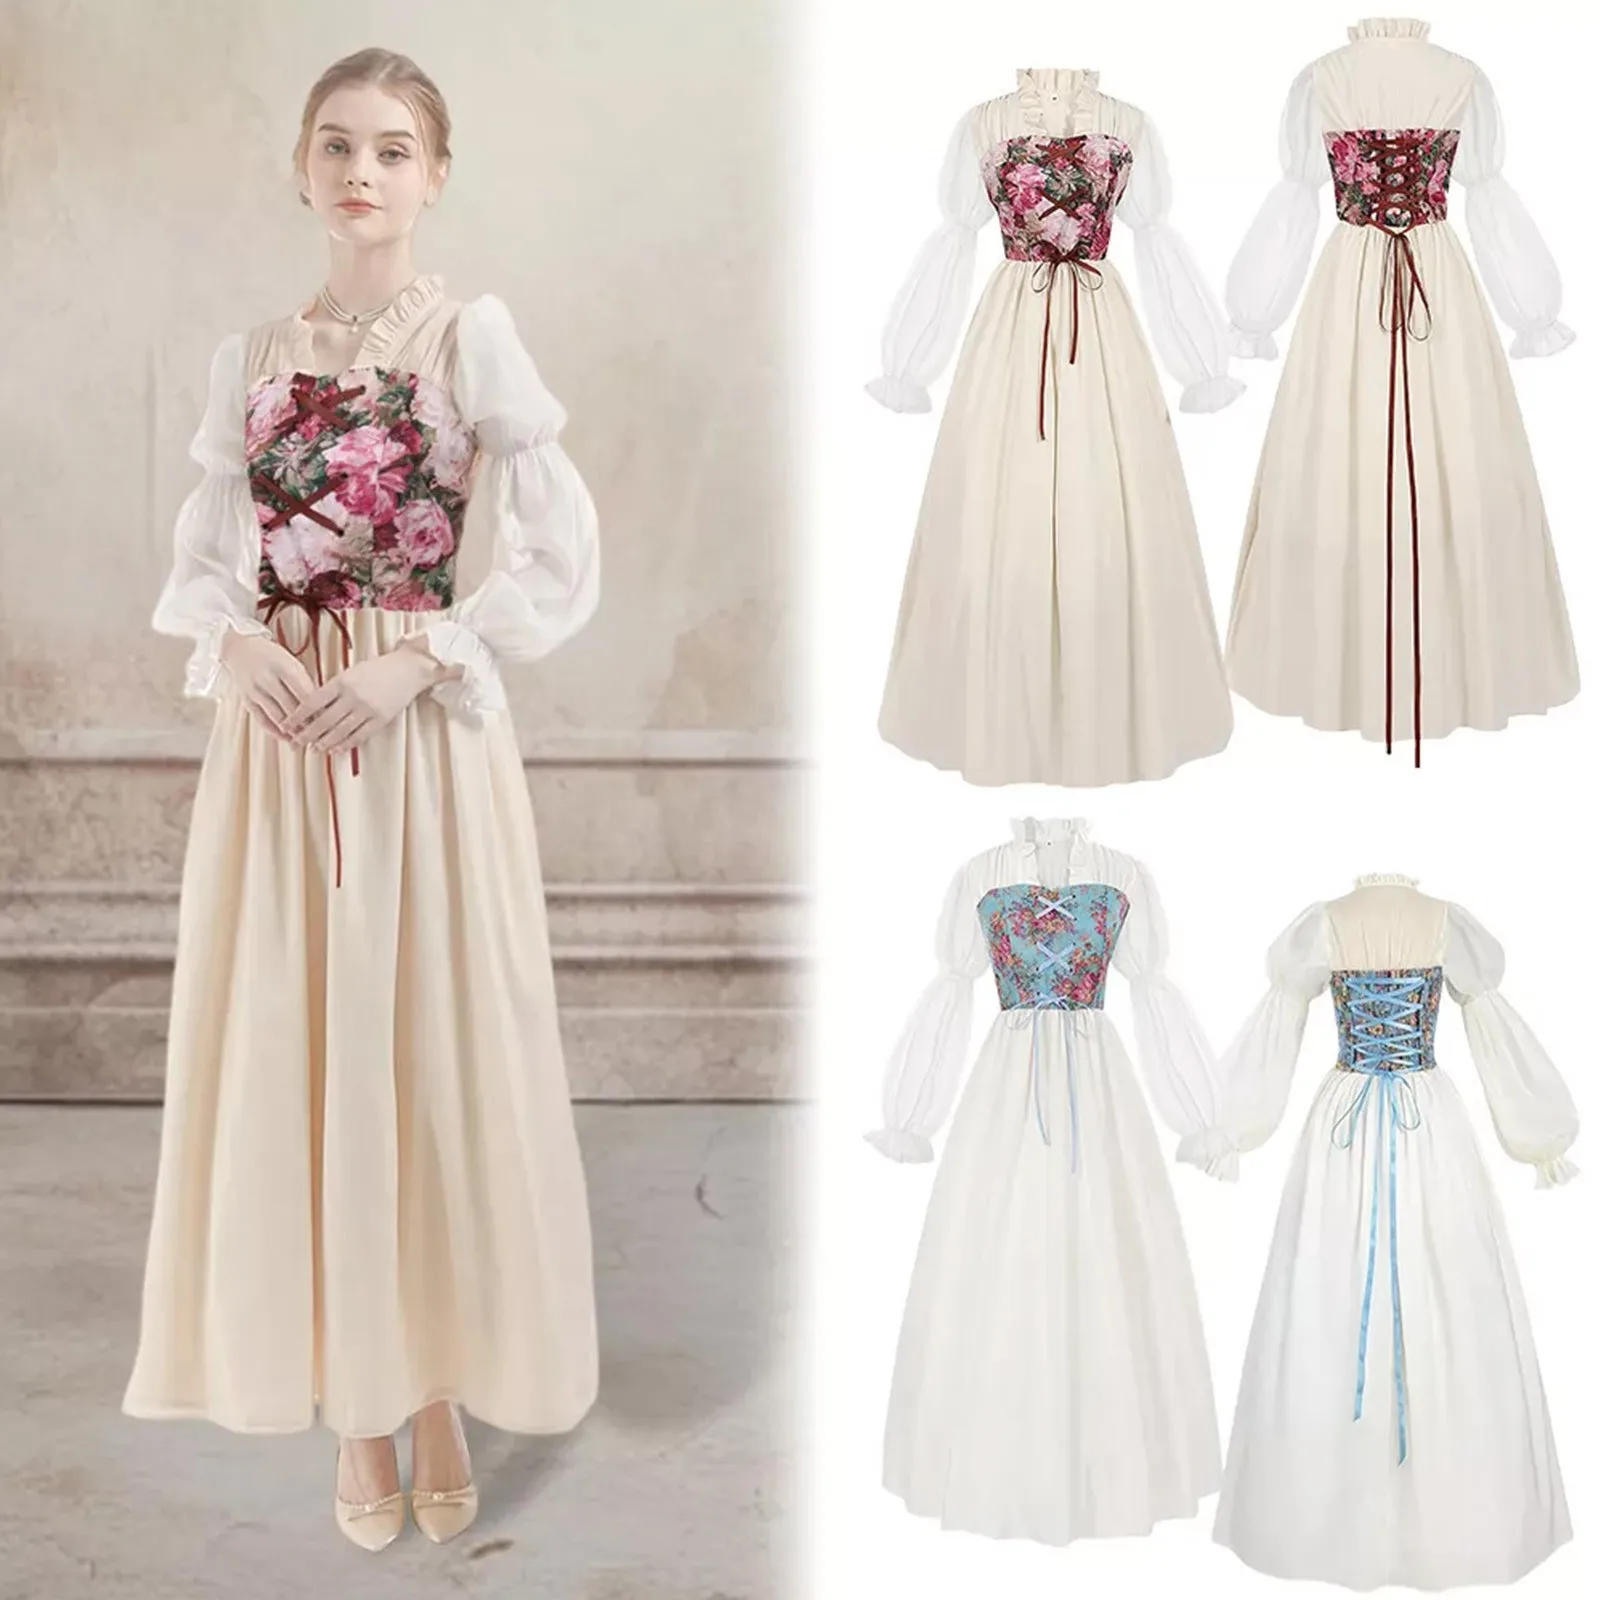 Gothic Medieval Dress Women Vintage Long Sleeve Sweetheart Dress Solid Court Style Dresses Formal Banquet Prom Party Dresses